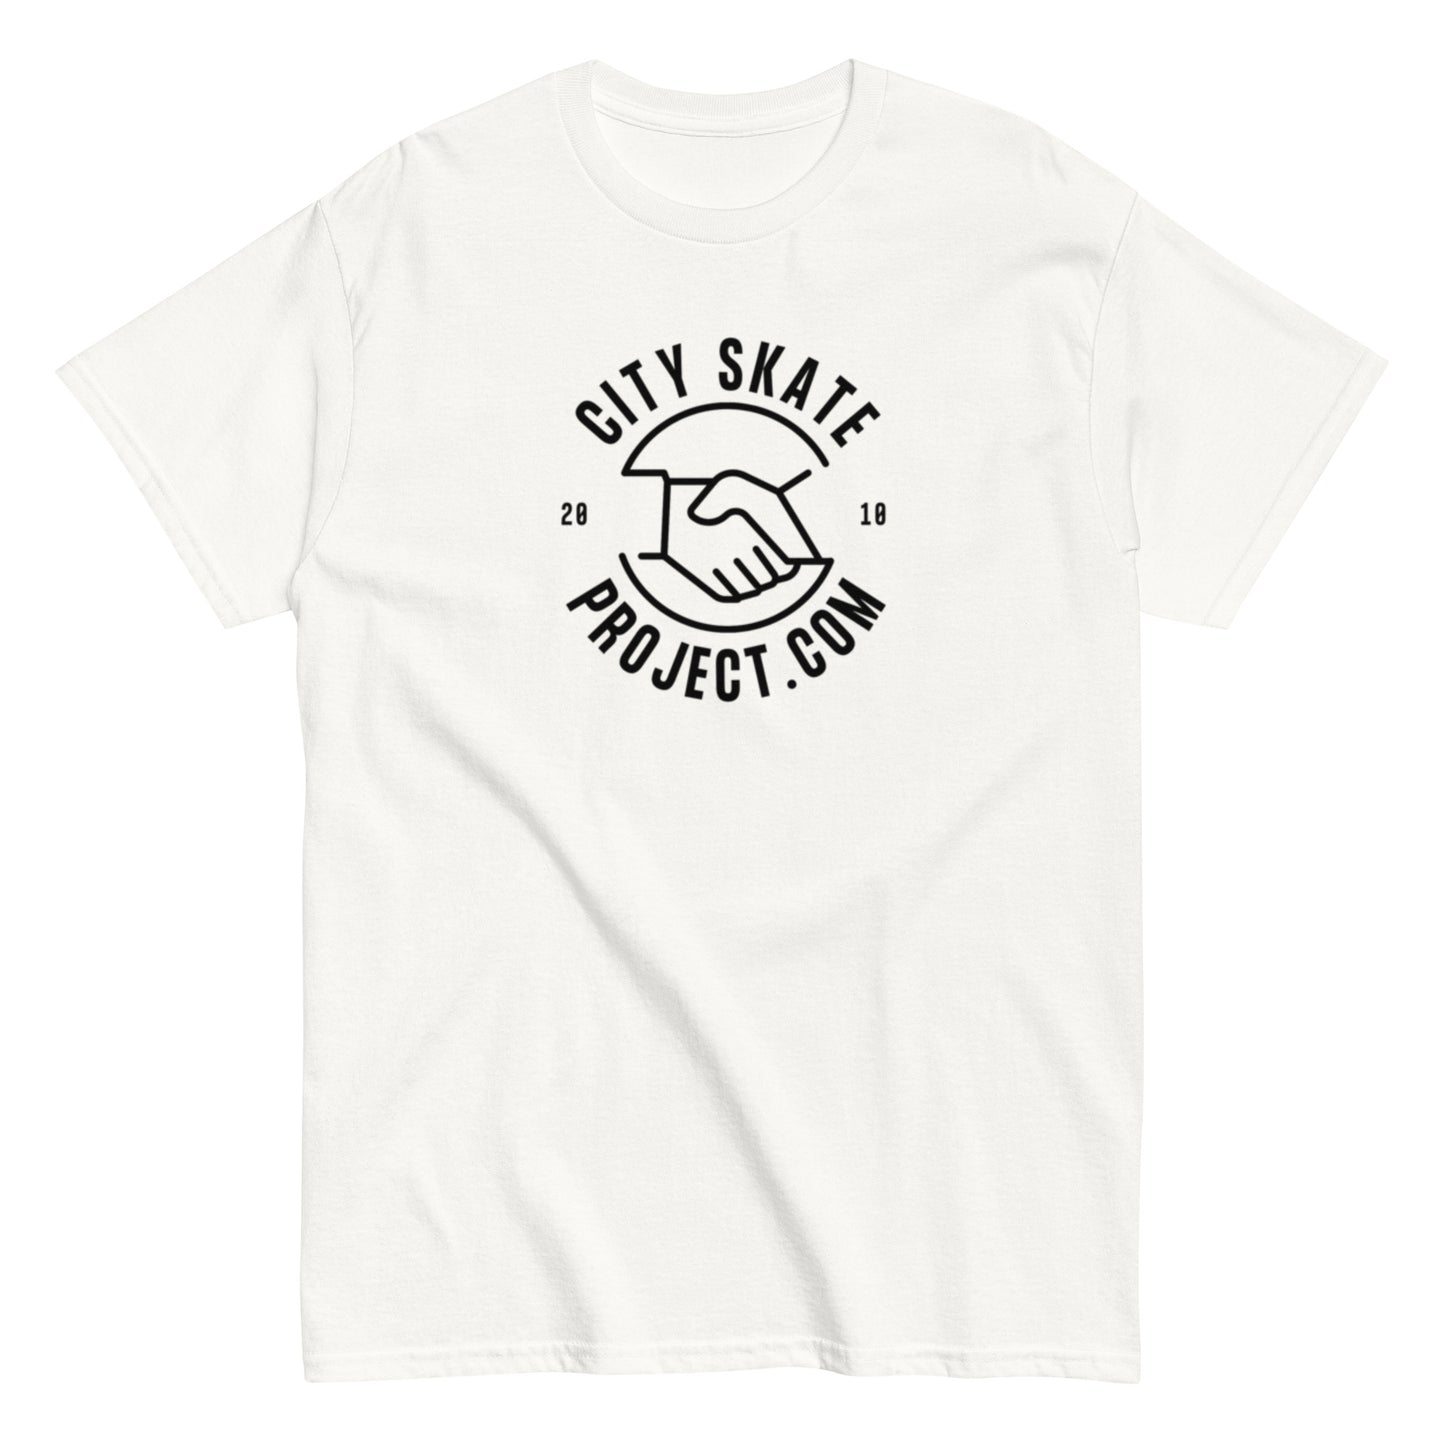 City Skate Project "Well Done" Men's classic tee